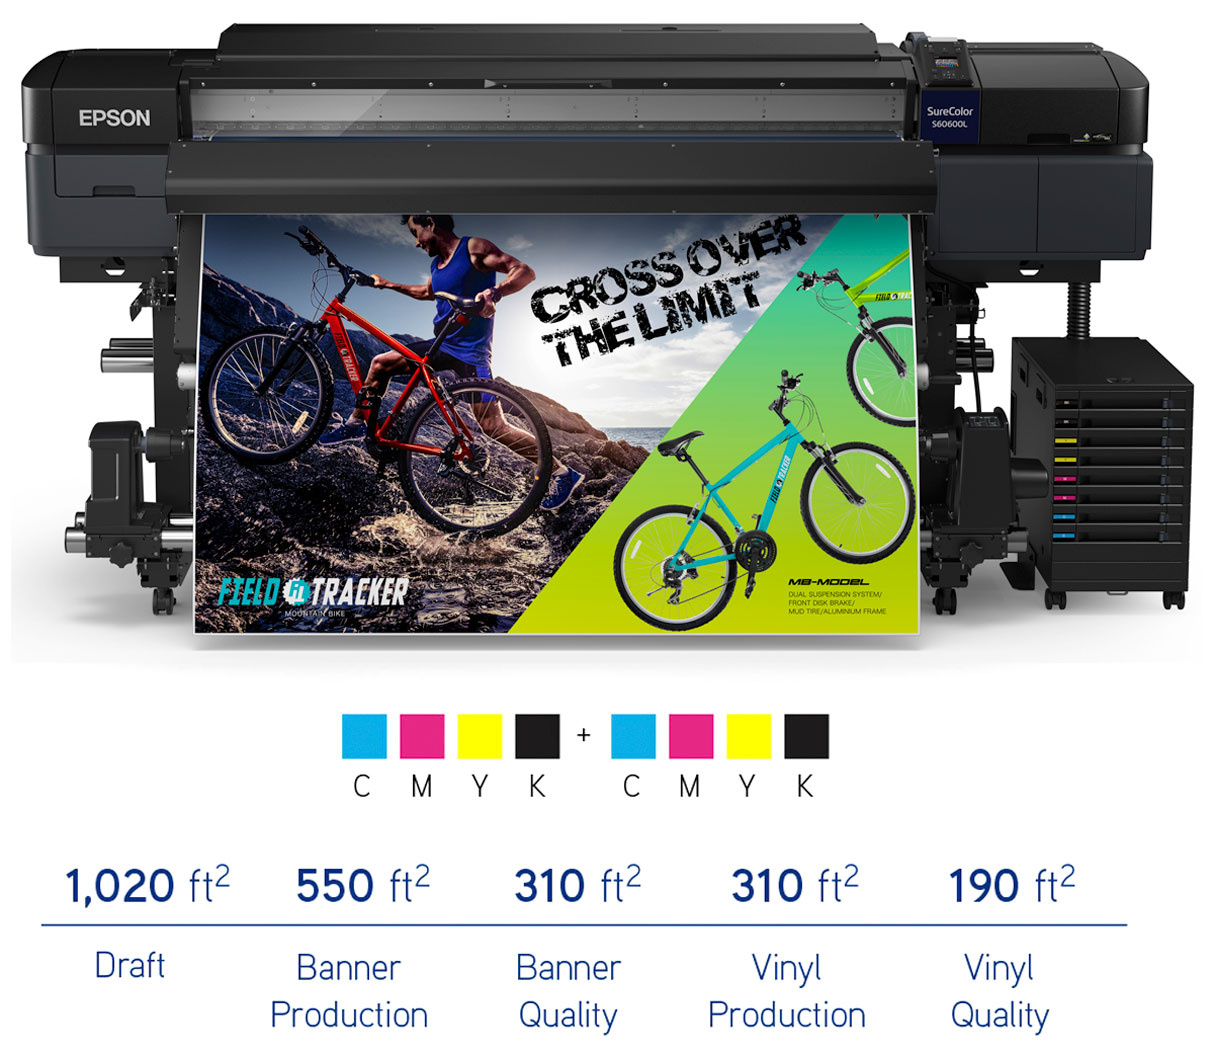 epson surecolor s60600l bulk ink eco solvent printer showing print speeds up to 1020 square feet per hour and cmyk inks x 2